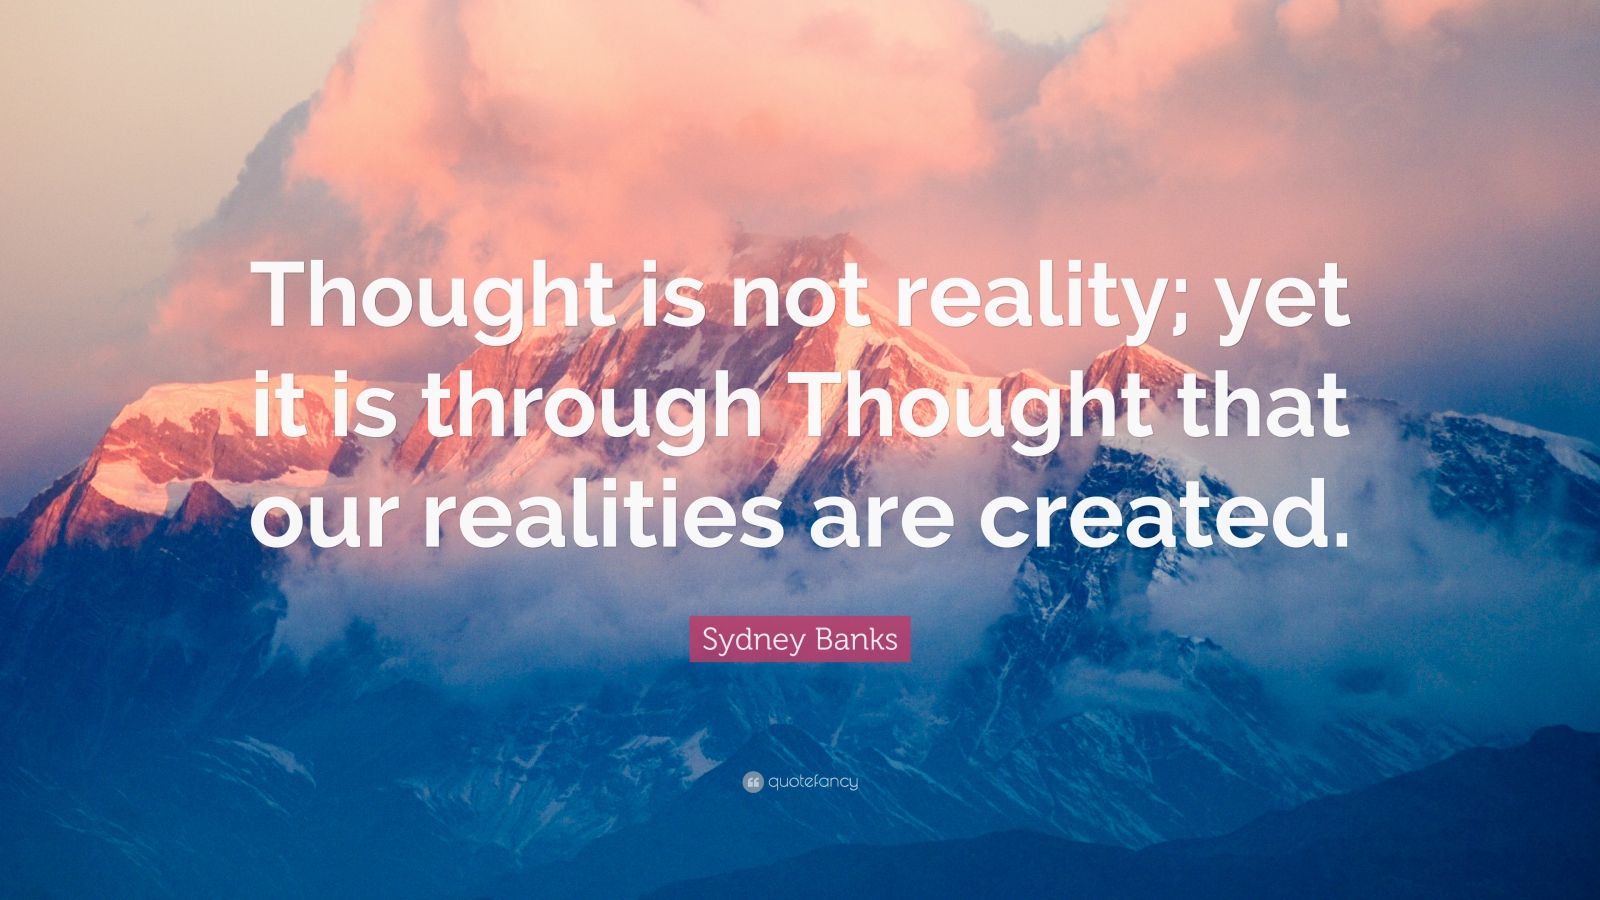 Sydney Banks Quote: “Thought is not reality; yet it is through Thought ...